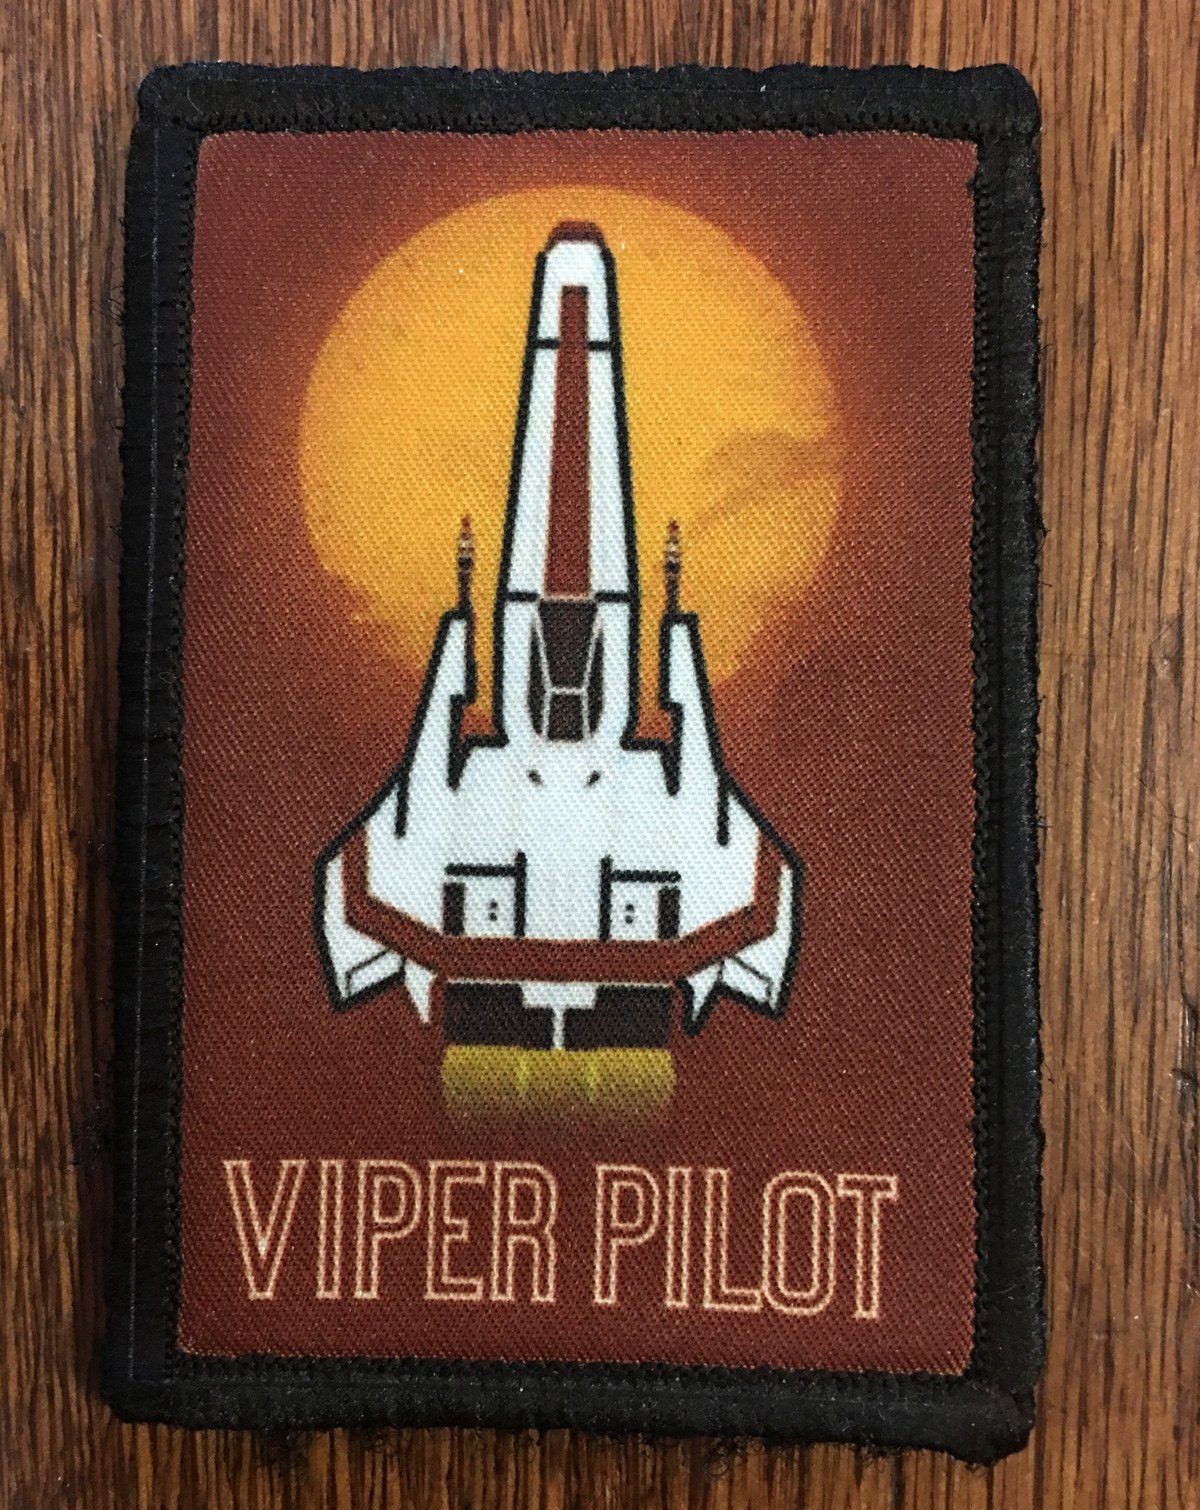 Battlestar Galactica Viper Pilot Morale Patch Morale Patches Redheaded T Shirts 